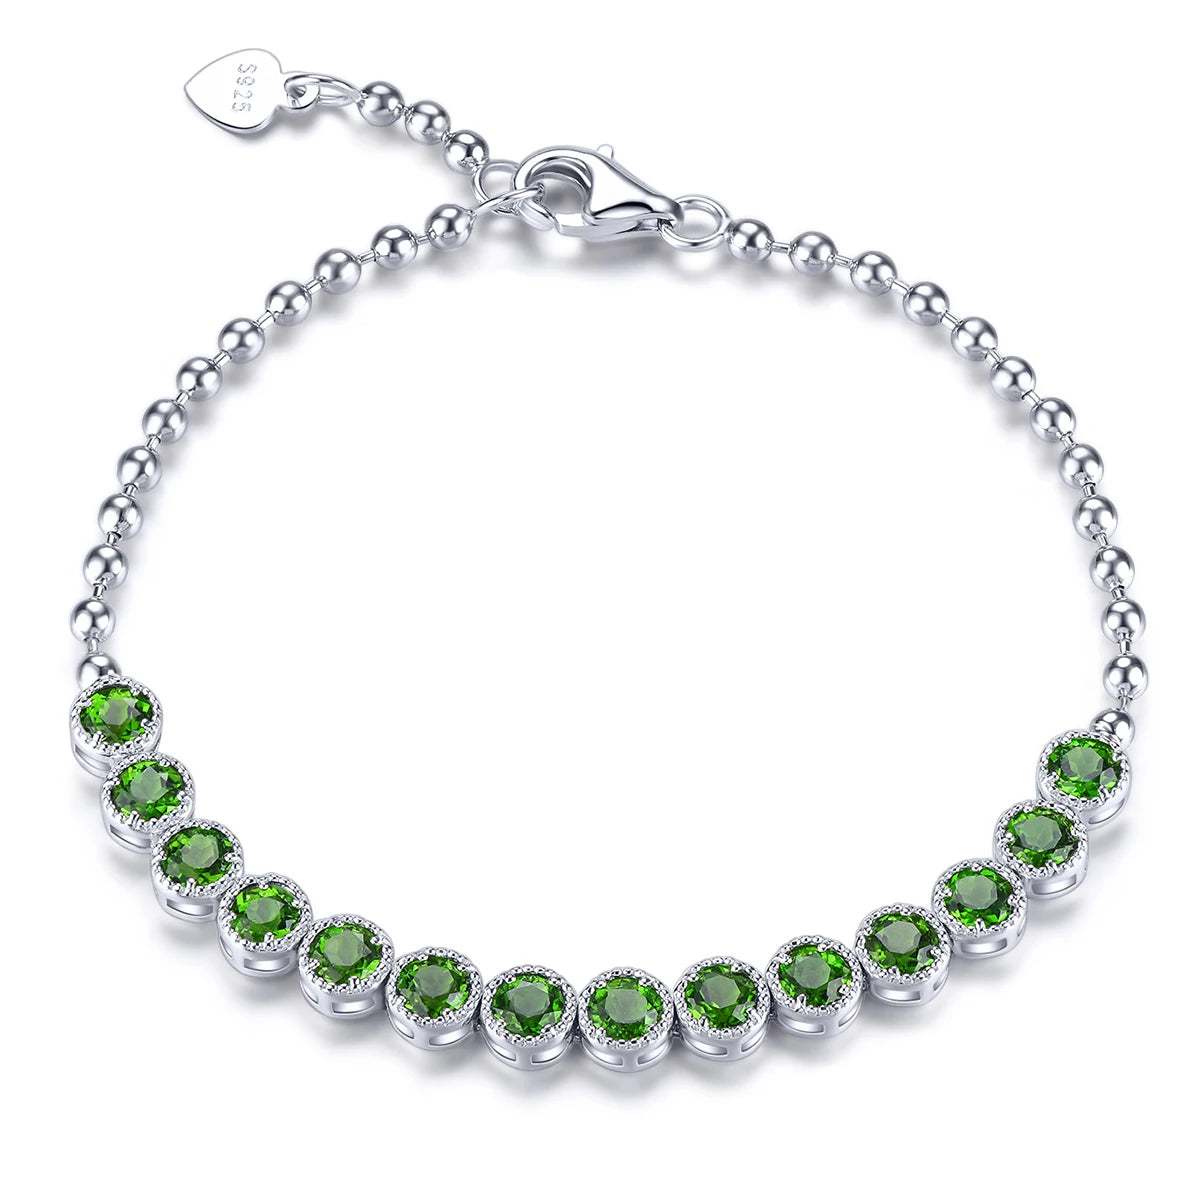 Natural Chrome Diopside Solid Sterling Silver Bracelet 2.9 Carats Genuine Green Gemstone Classic Fine Jewelry Design Women Gifts Natural Diopside 19cm